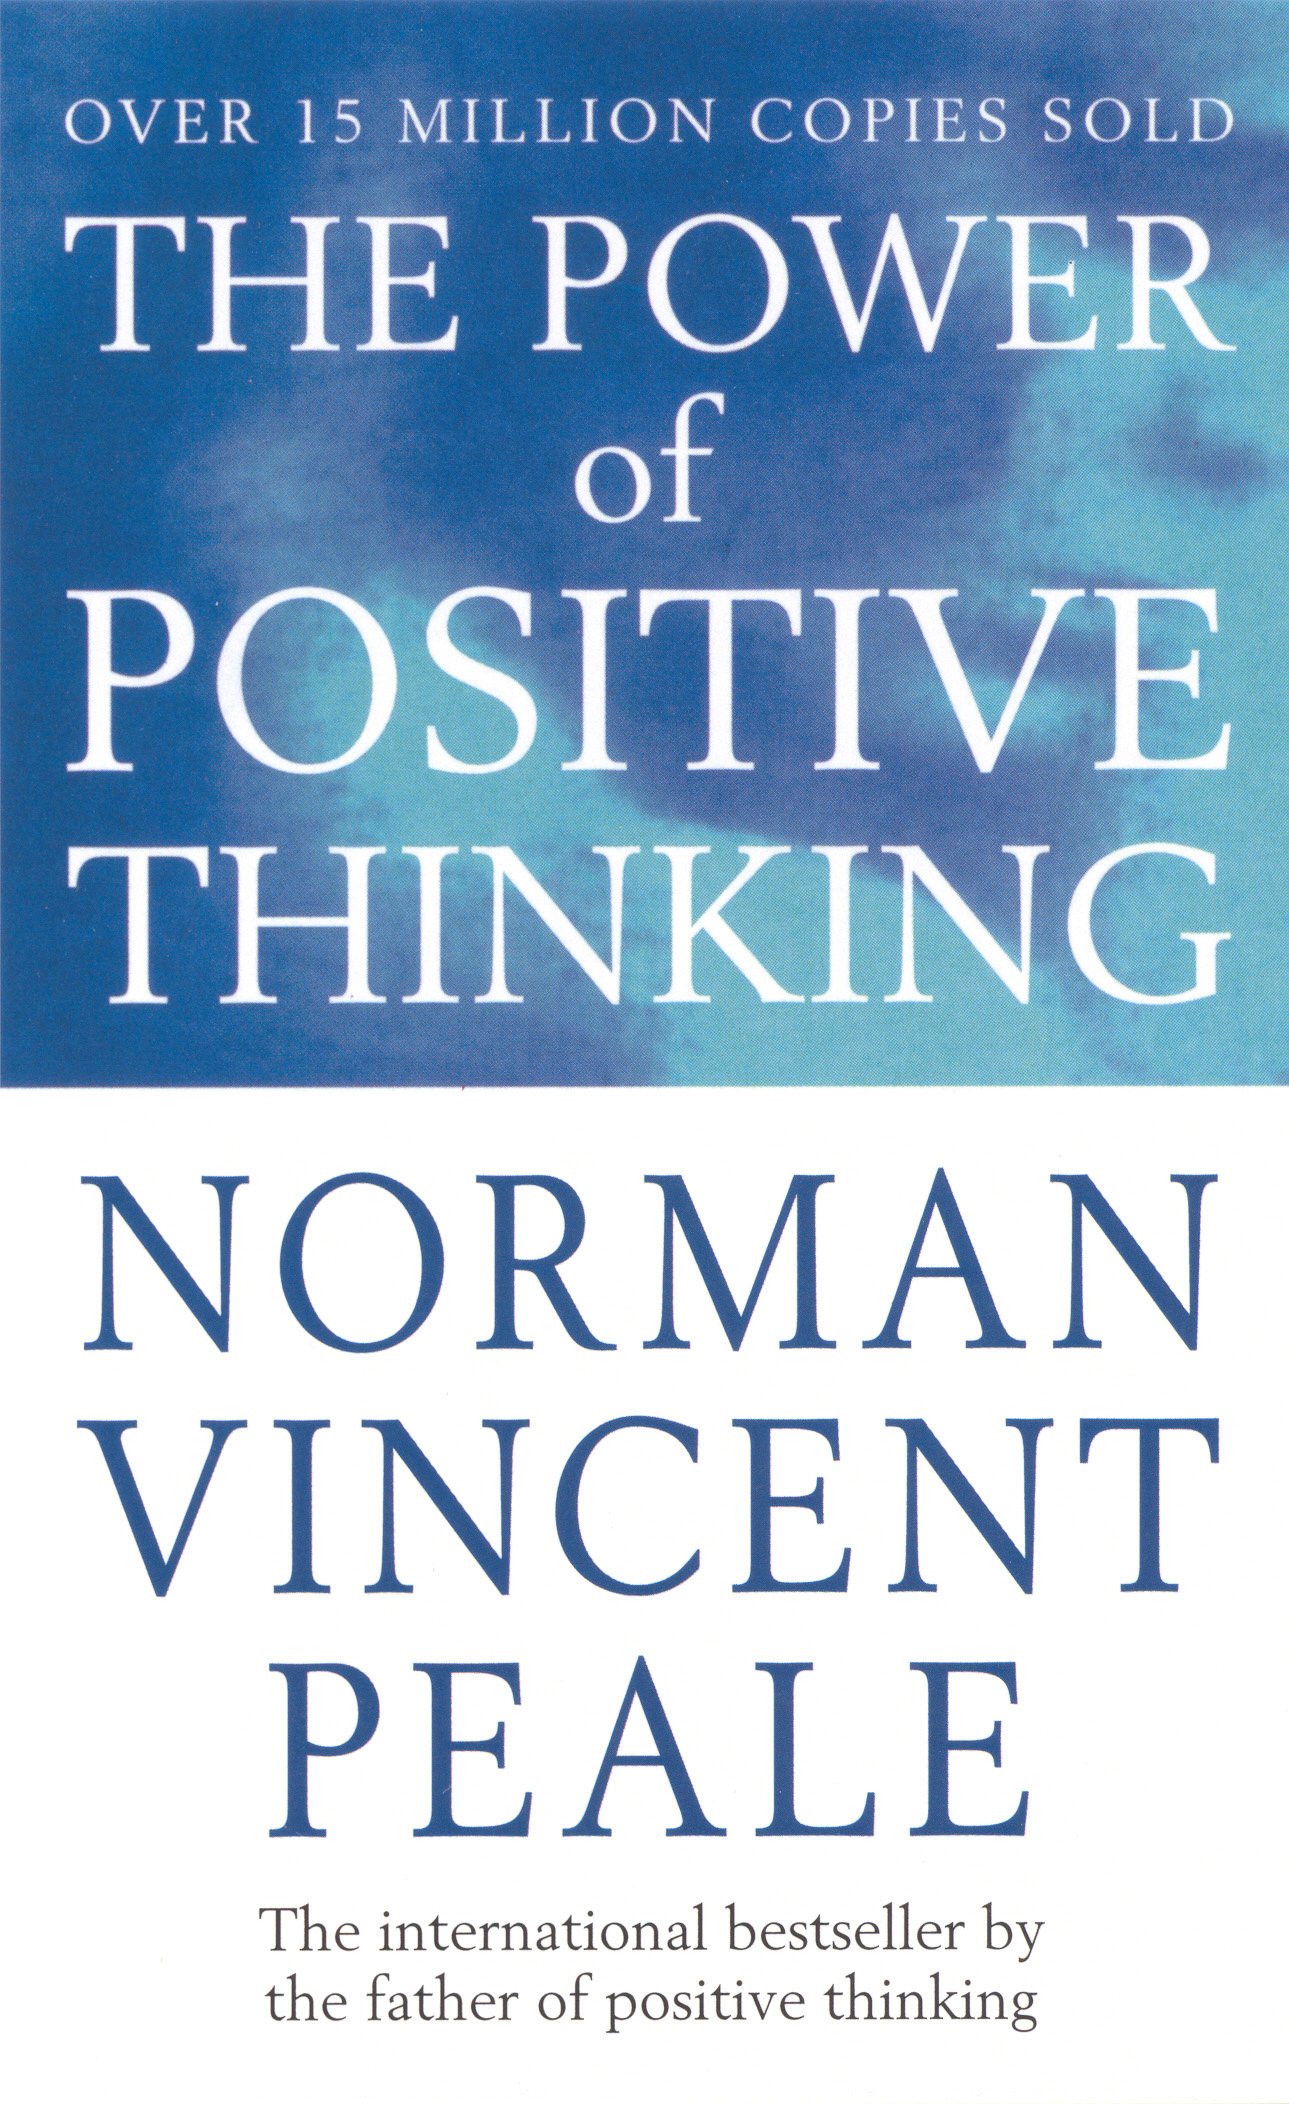 11. 'The Power of Positive Thinking' by Norman Vincent Peale